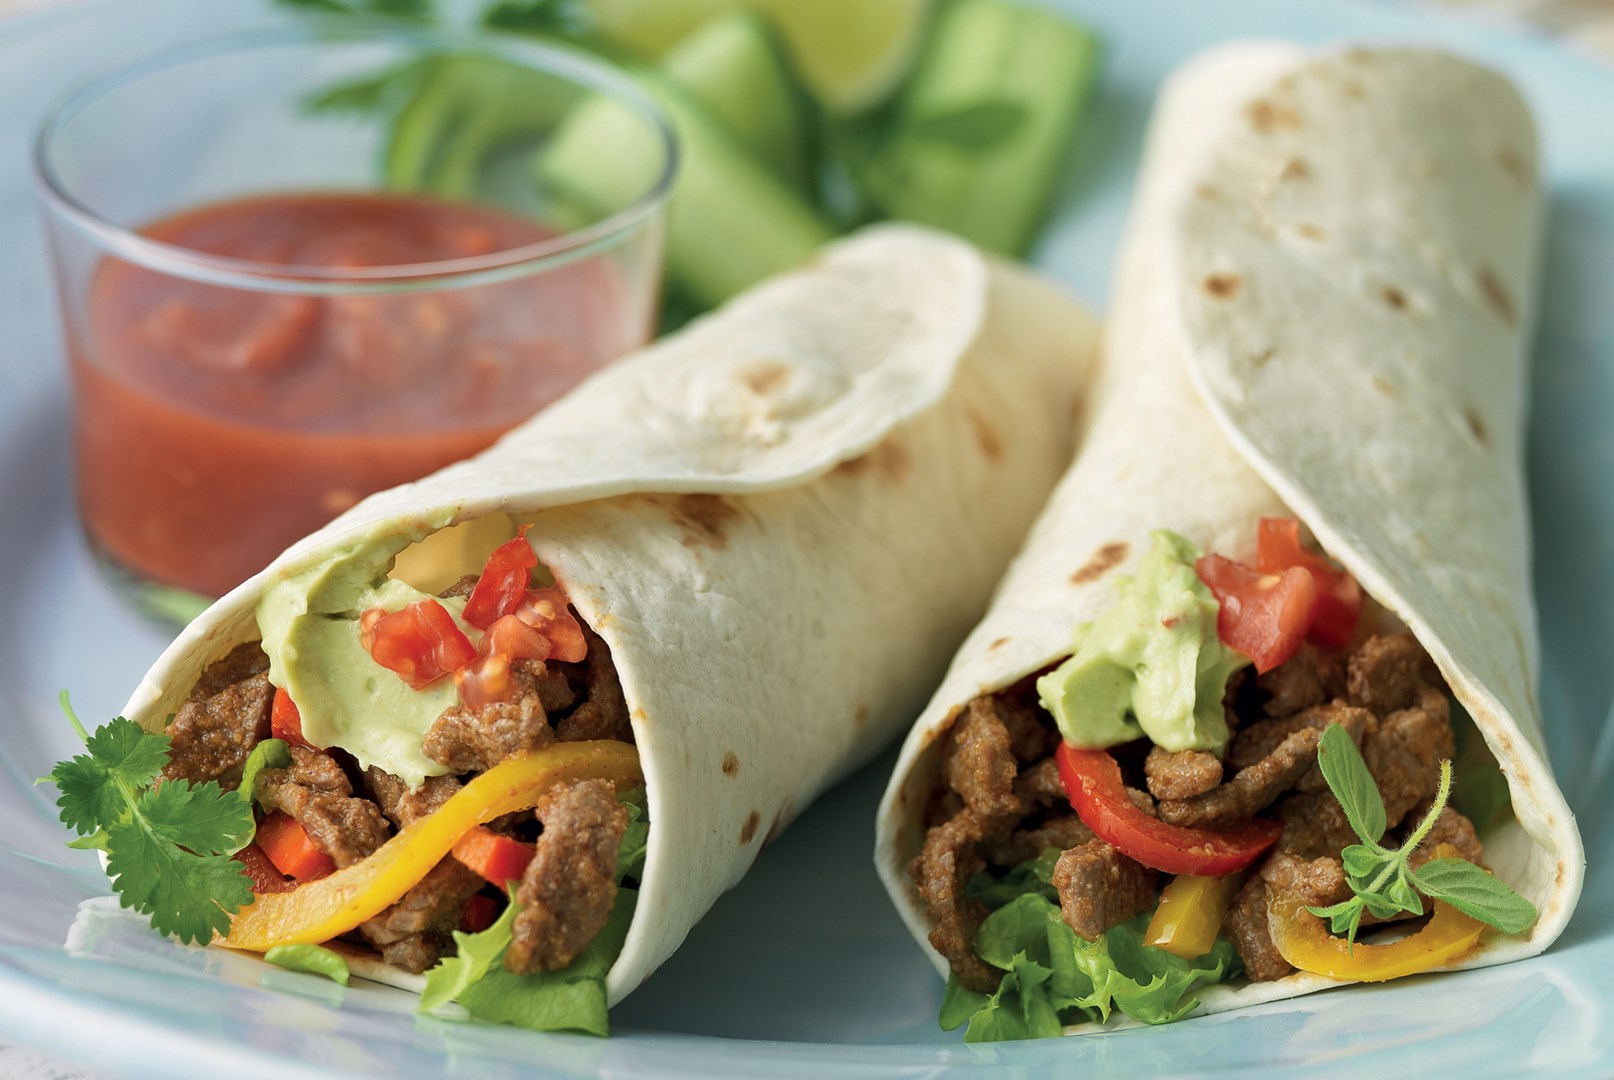 KEEP CALM, stay at home and cook Burritos.